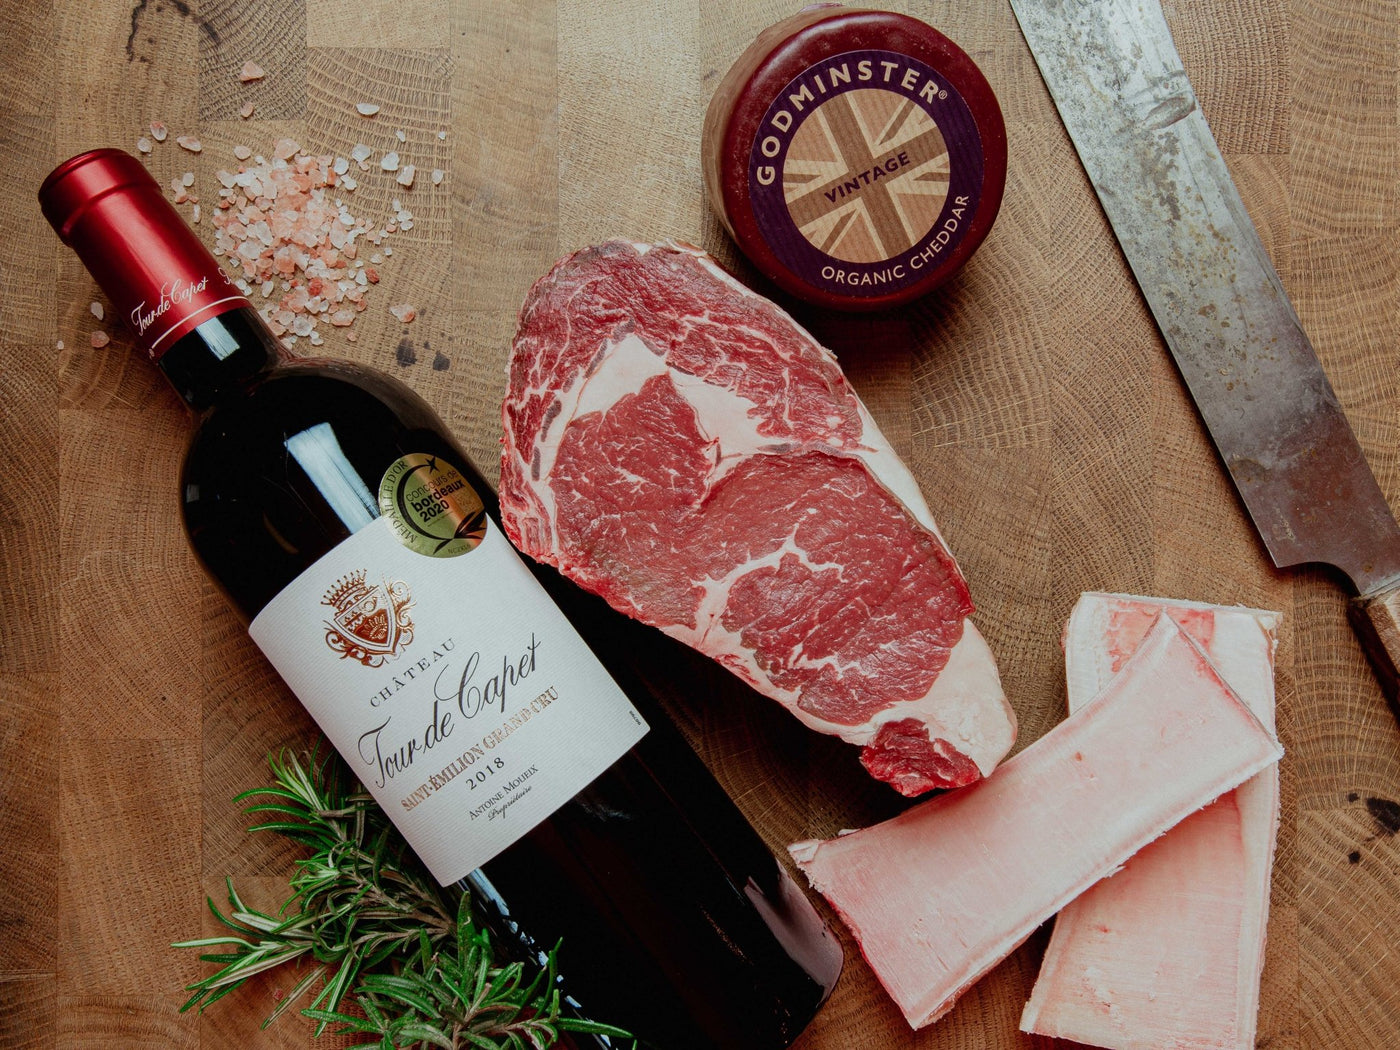 45 Day Dry-Aged Ribeye Valentine's Day Box - Thomas Joseph Butchery - Ethical Dry-Aged Meat The Best Steak UK Thomas Joseph Butchery